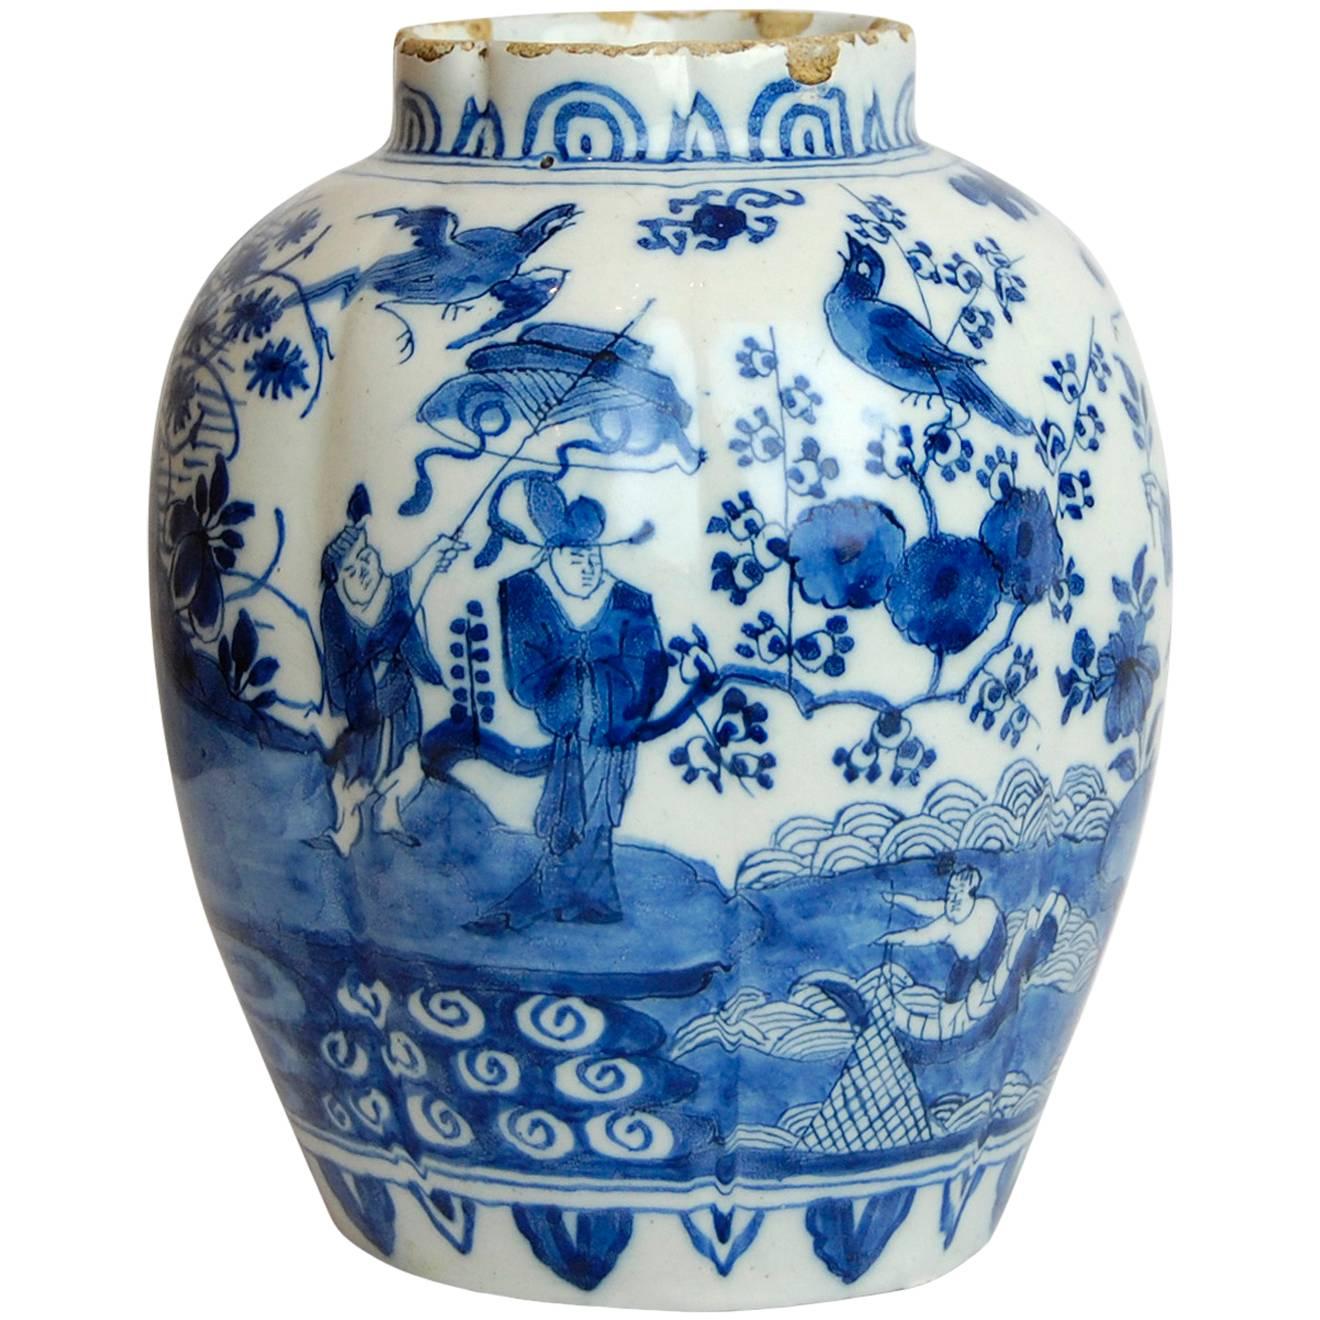 18th Century Dutch Delft Porcelain Vase Blue and White Chinoiserie Painting